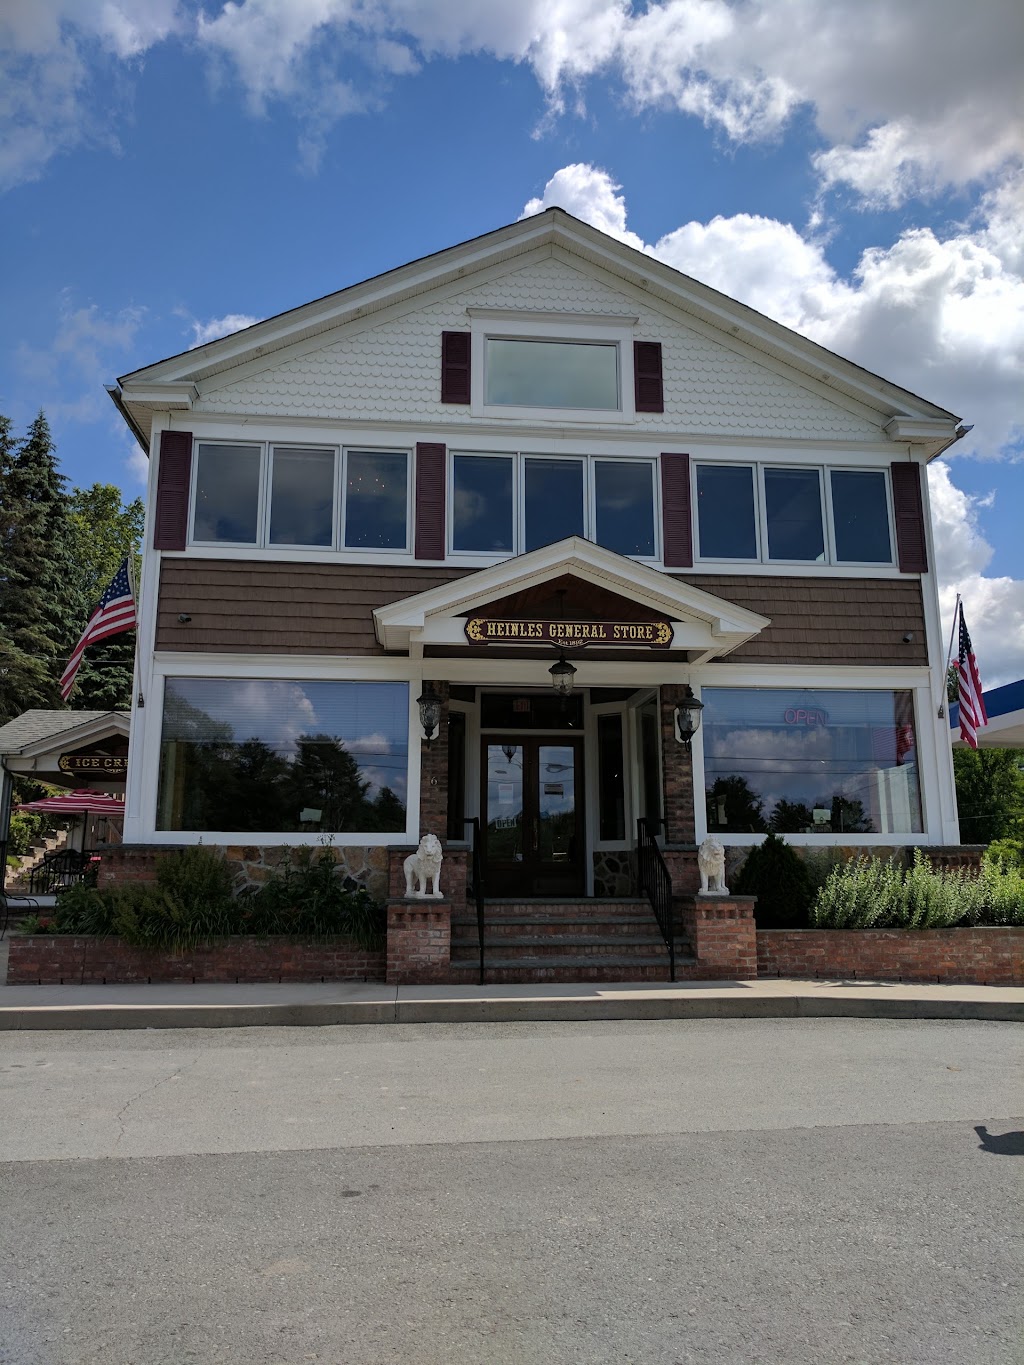 Heinles General Store | 6 Old County Rd, Cochecton, NY 12726 | Phone: (845) 252-3354